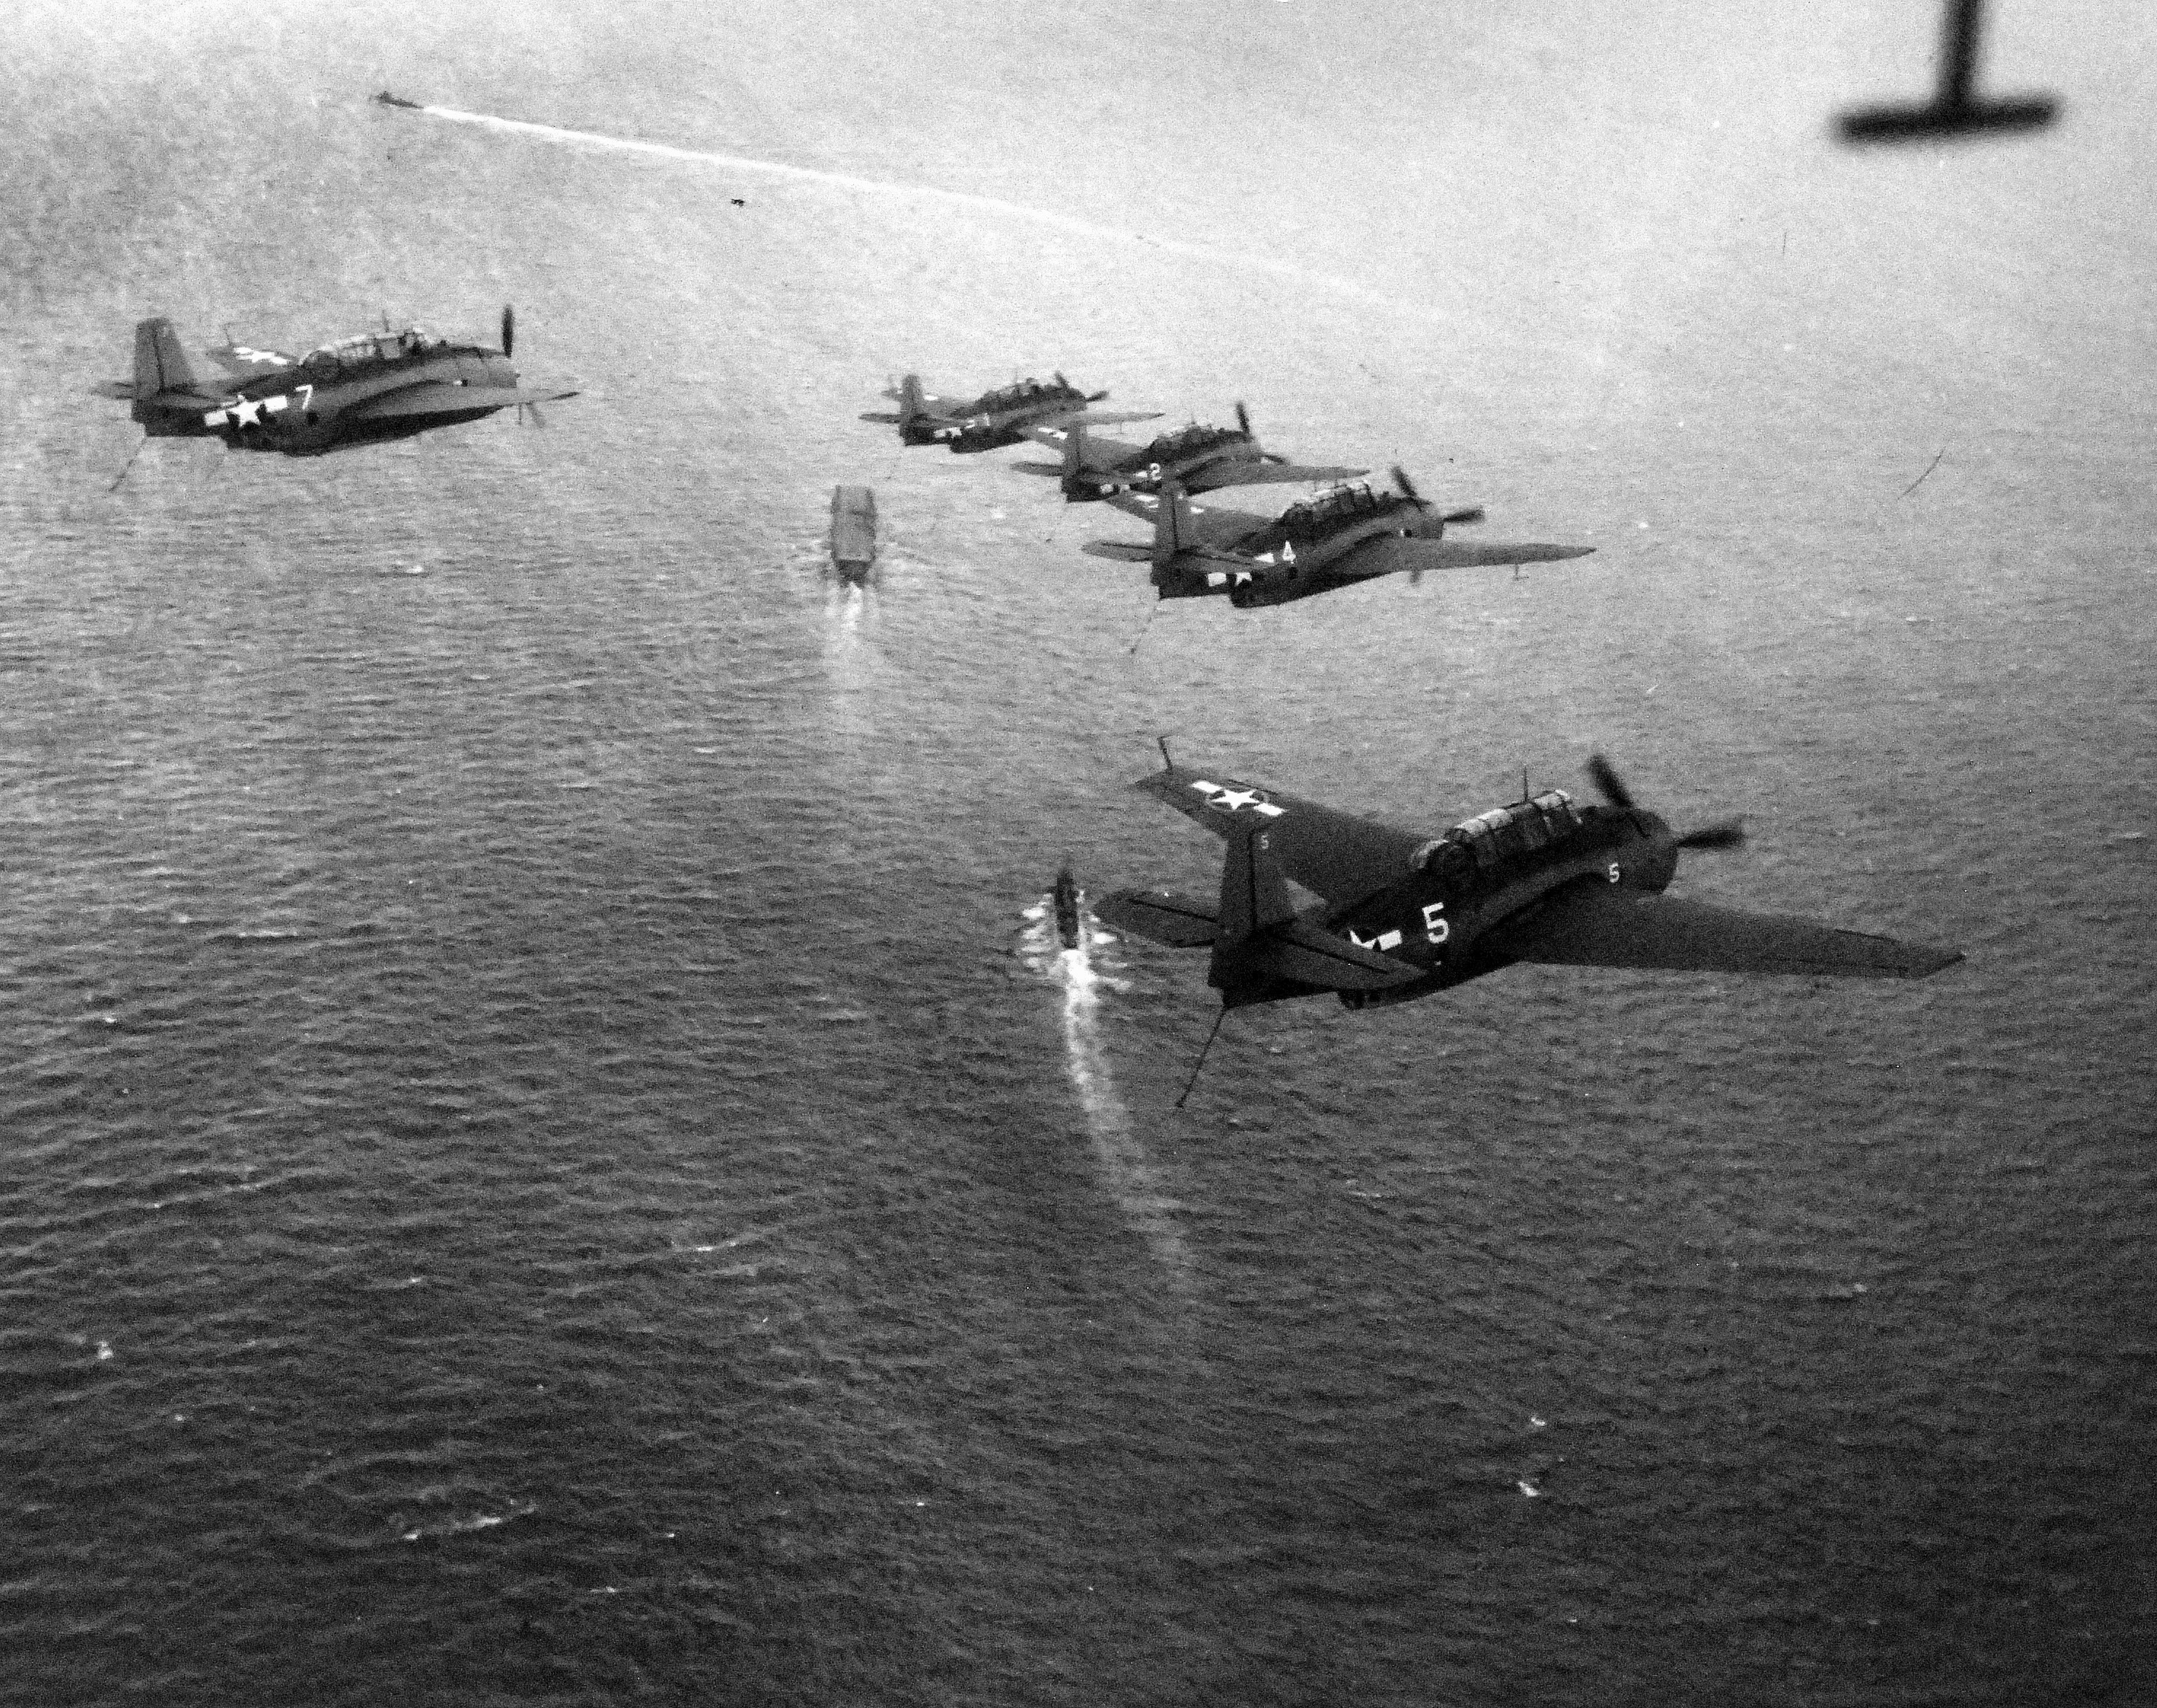 TBF Avengers in formation over the carrier USS Ranger with destroyer USS Forrest trailing while training in the Atlantic off Scapa Flow, Scotland, United Kingdom, 4 Sep 1943.